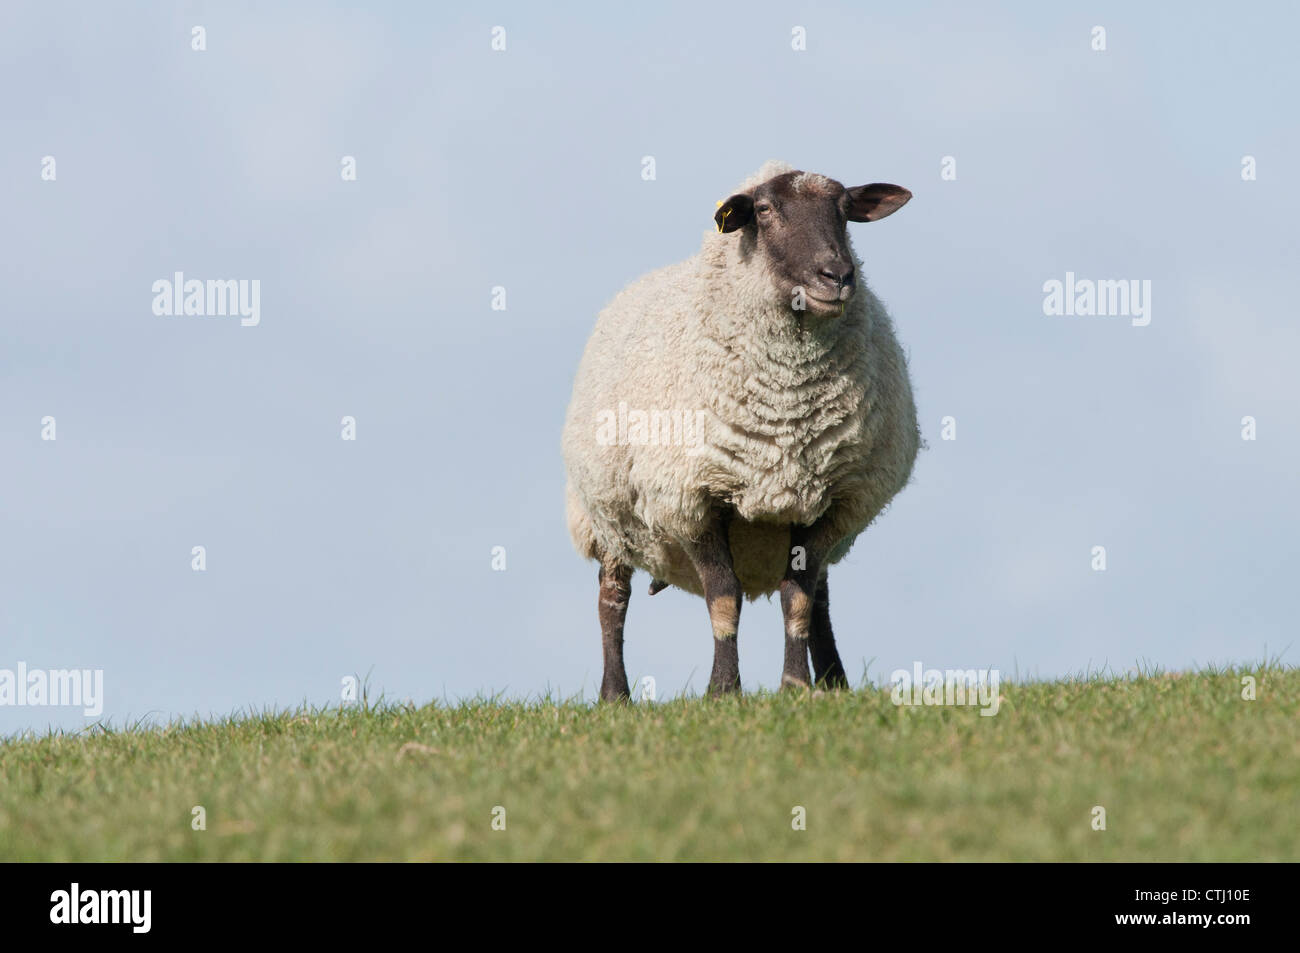 Sheep standing in field Stock Photo